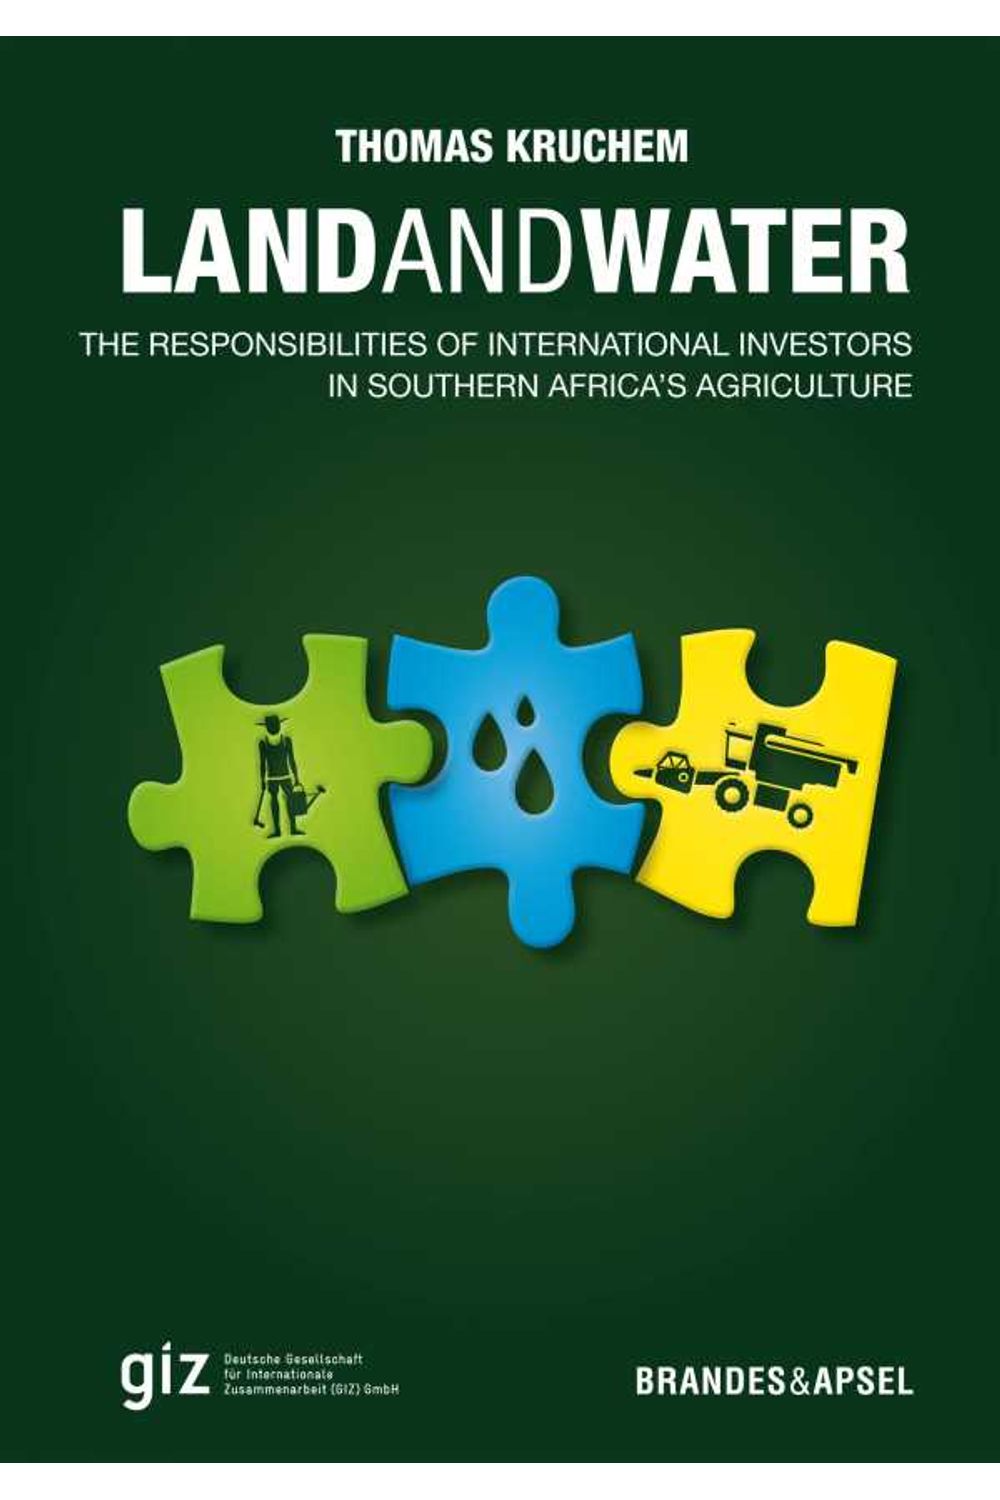 bw-land-and-water-brandes-apsel-verlag-9783955580537